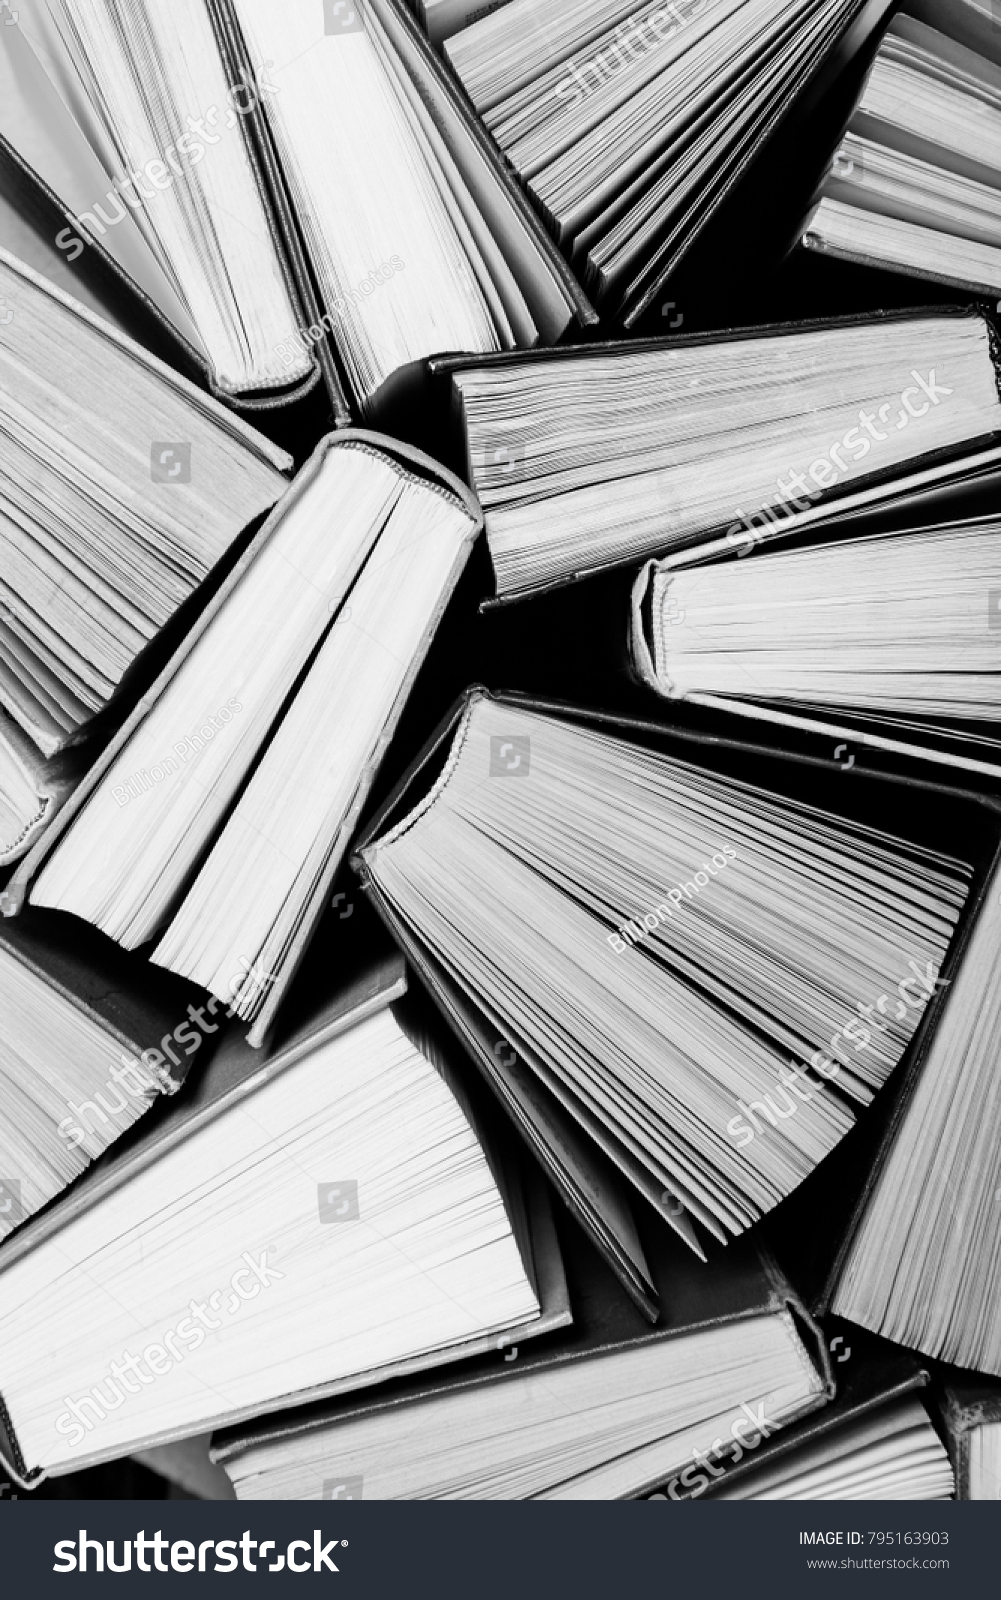 A black and white image of hardback books or text books from above. Books and reading are essential for self improvement, gaining knowledge and success in our careers, business and personal lives #795163903